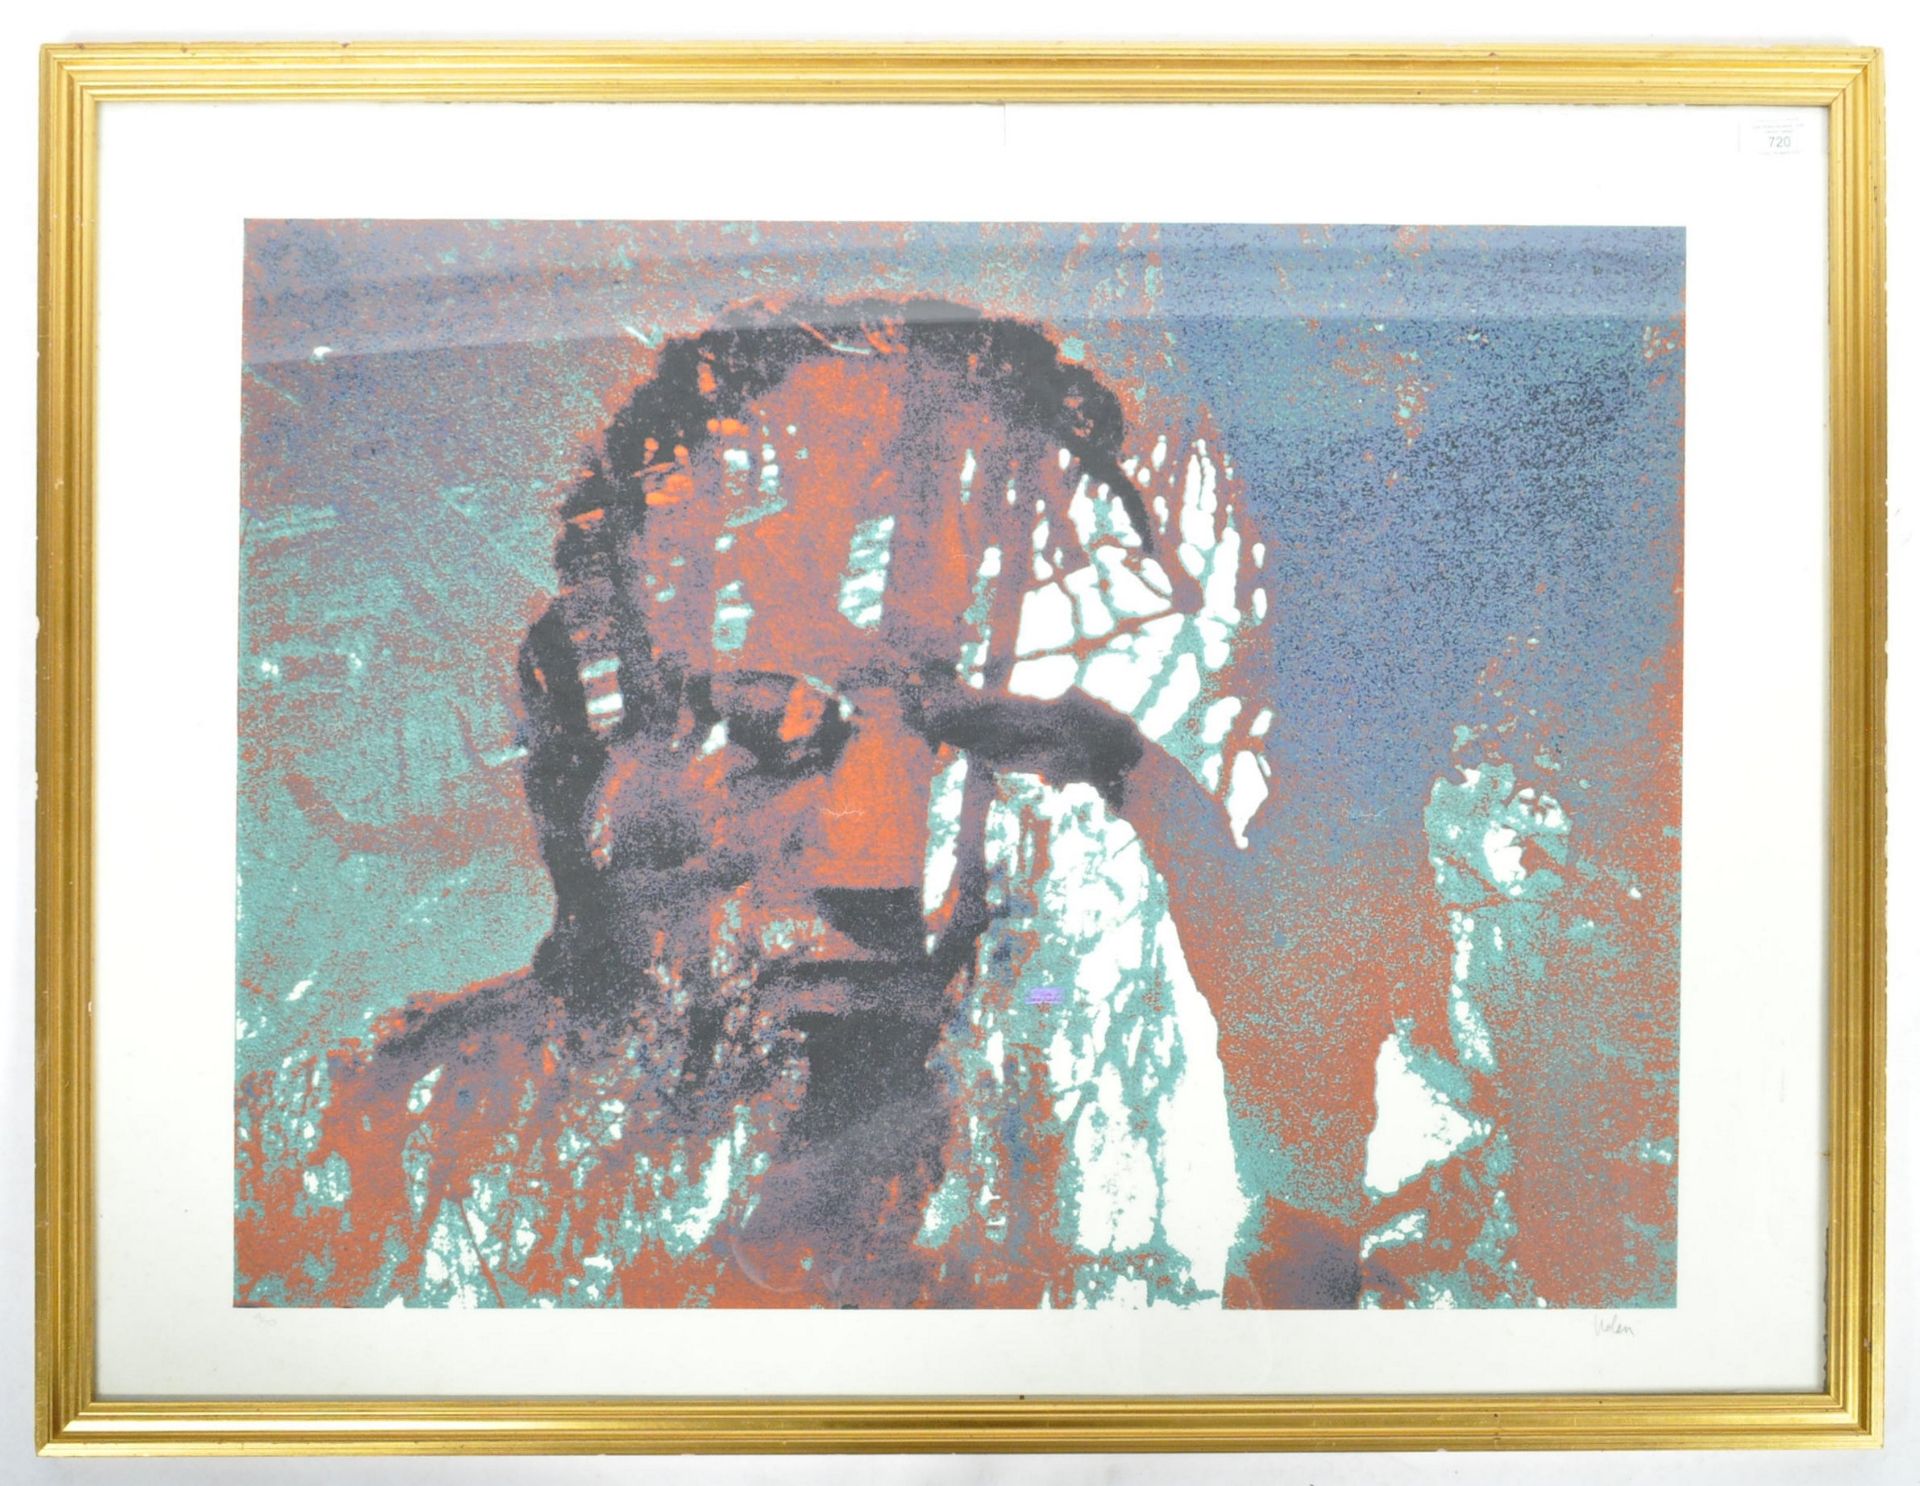 SIR SIDNEY NOLAN - NED KELLY - LIMITED EDITION SCREEN PRINT